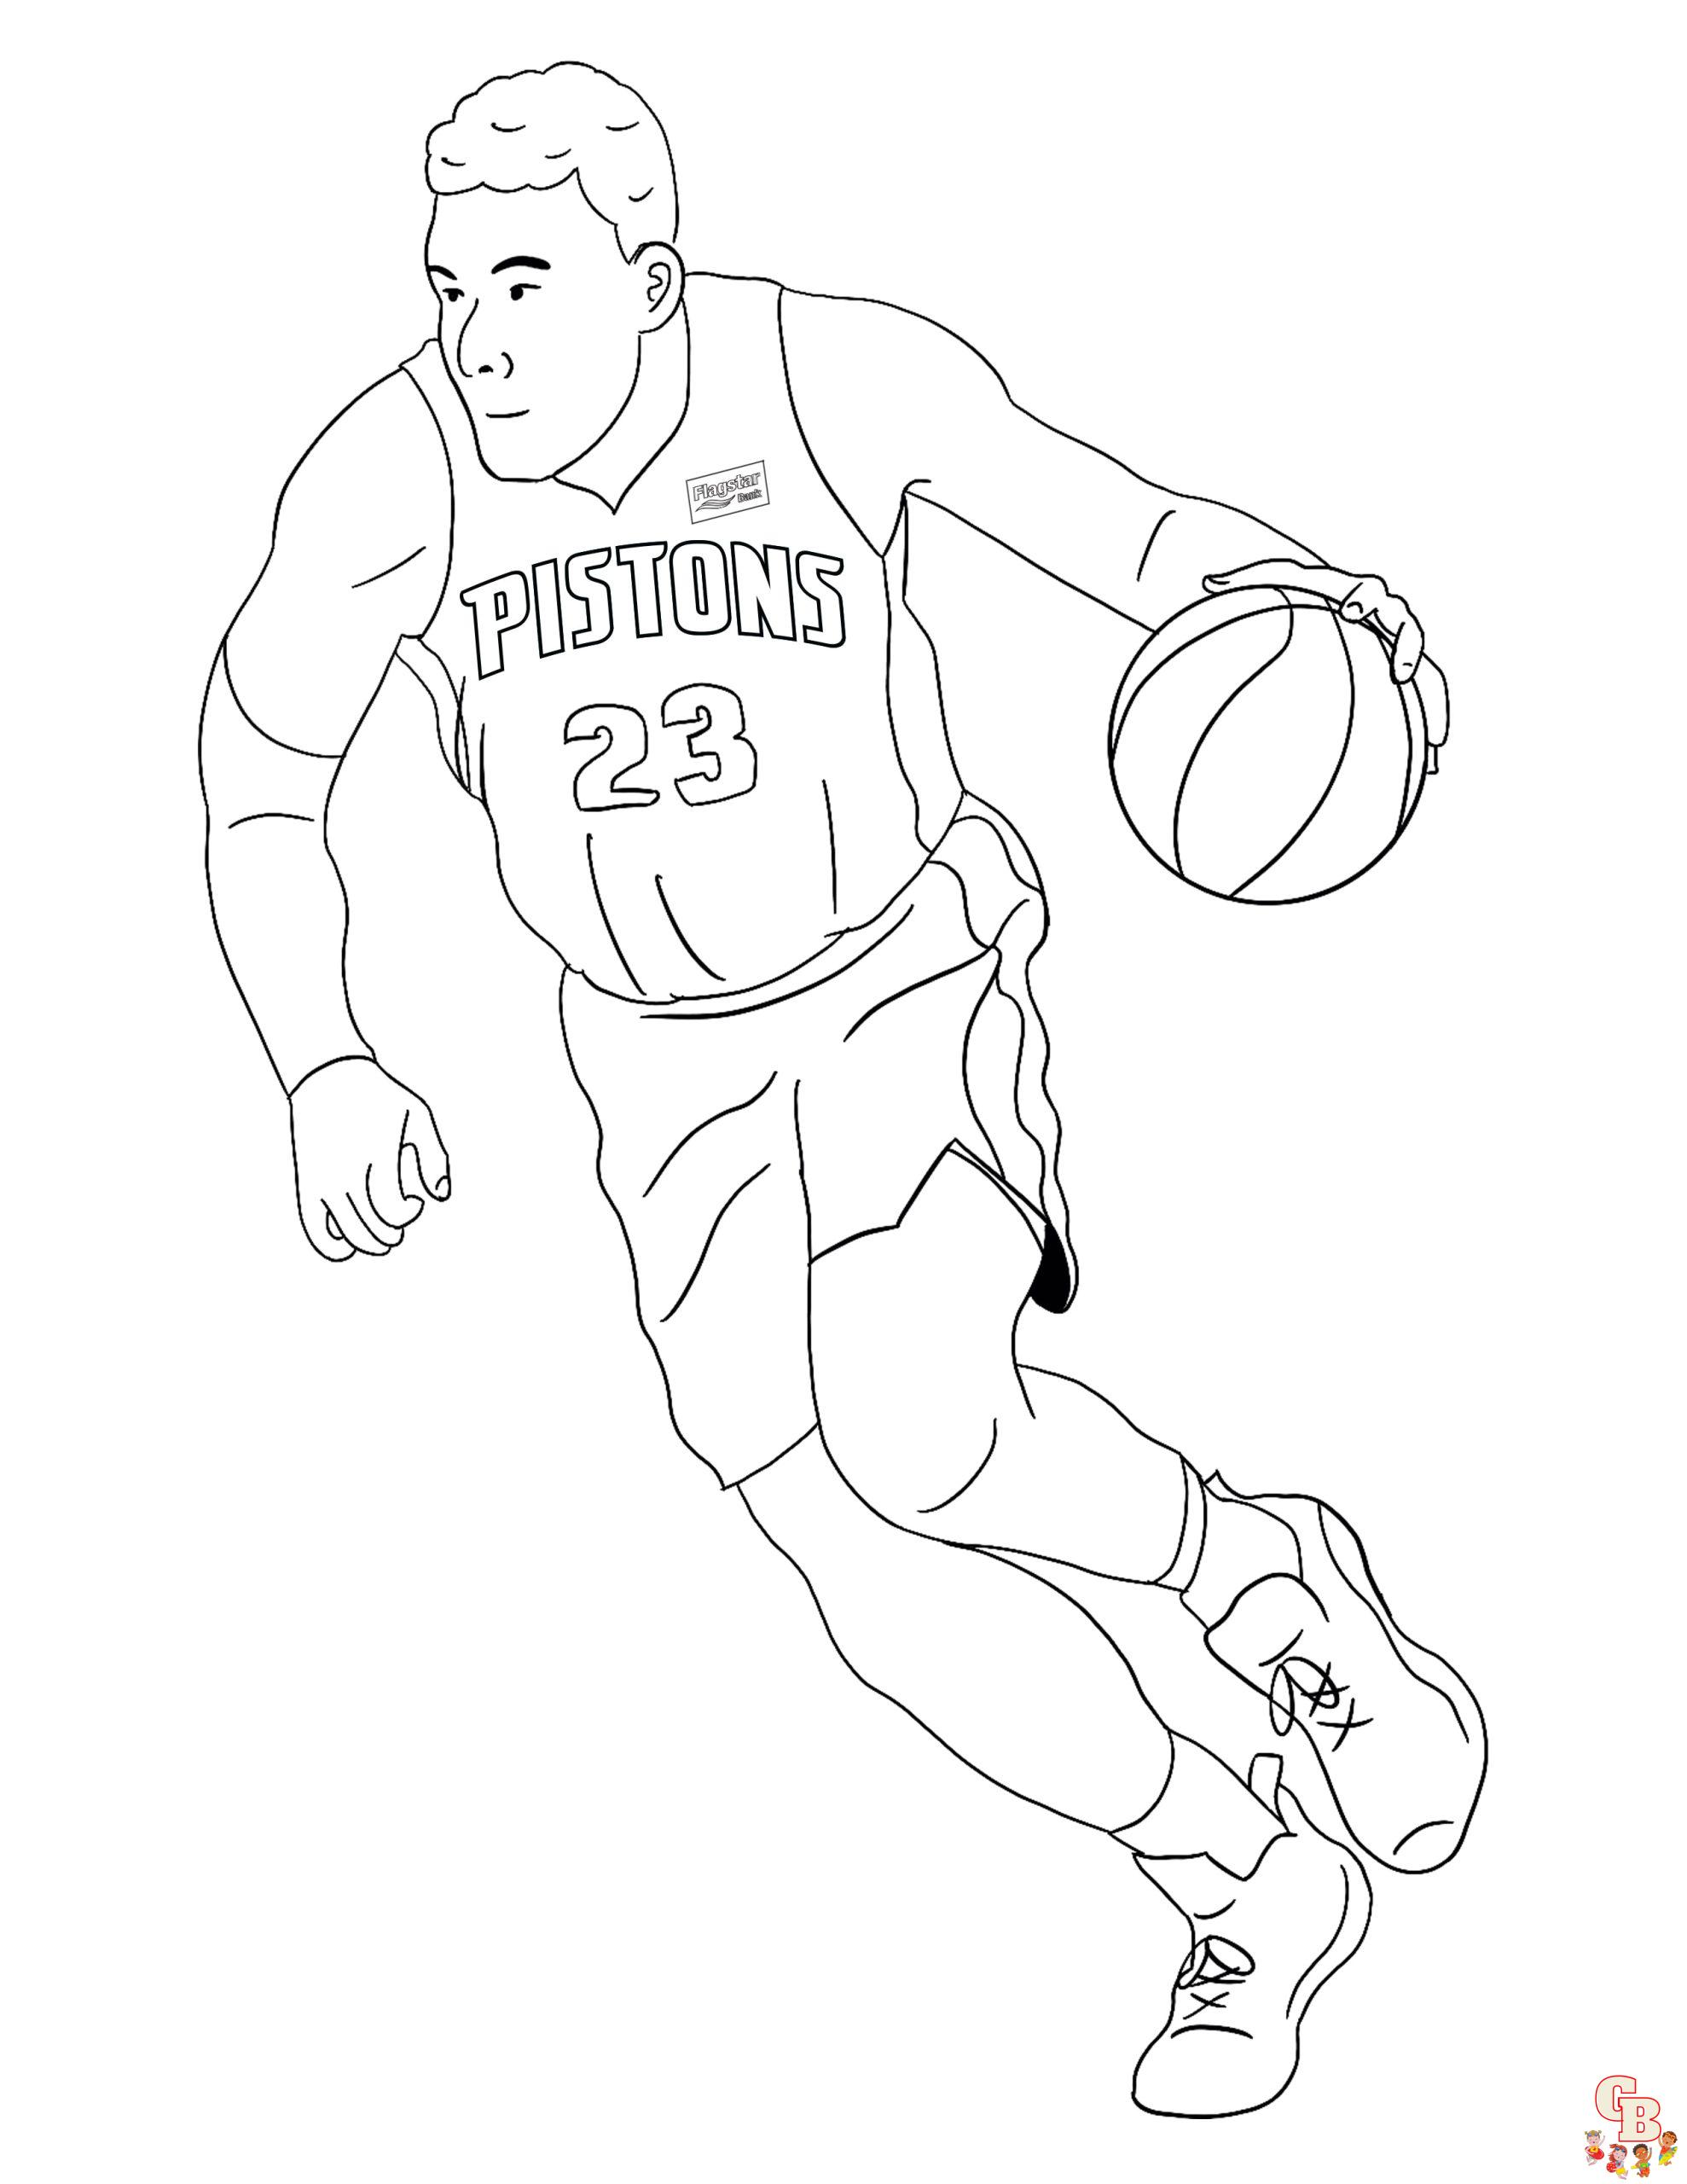 Michael Jordan NBA Basketball Coloring Pages - Get Coloring Pages